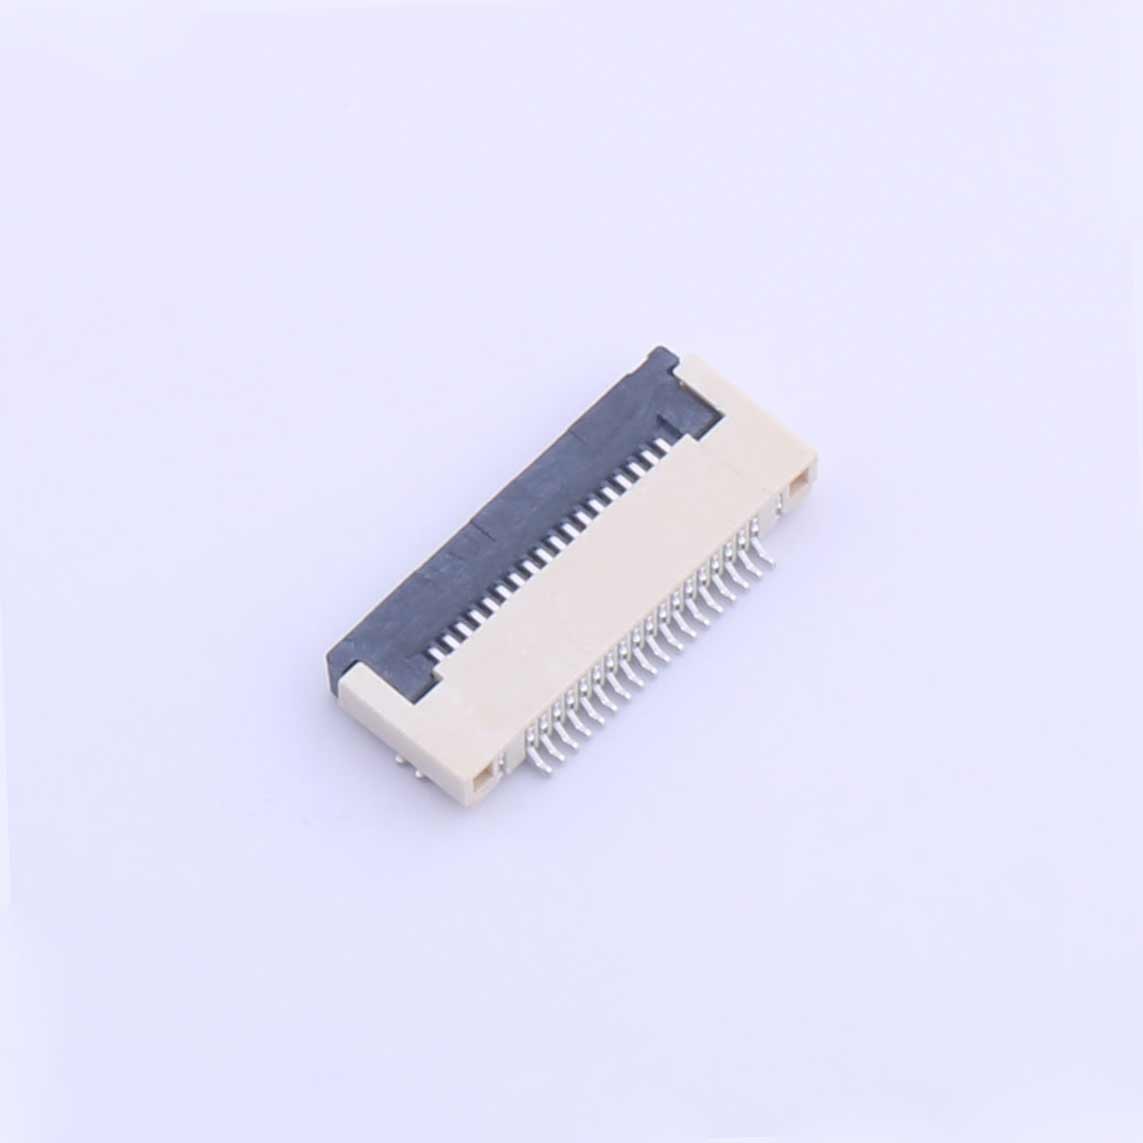 Kinghelm 0.5mm Pitch FPC FFC Connector 18P Height 2mm Front Flip Bottom Contact SMT FPC Connector